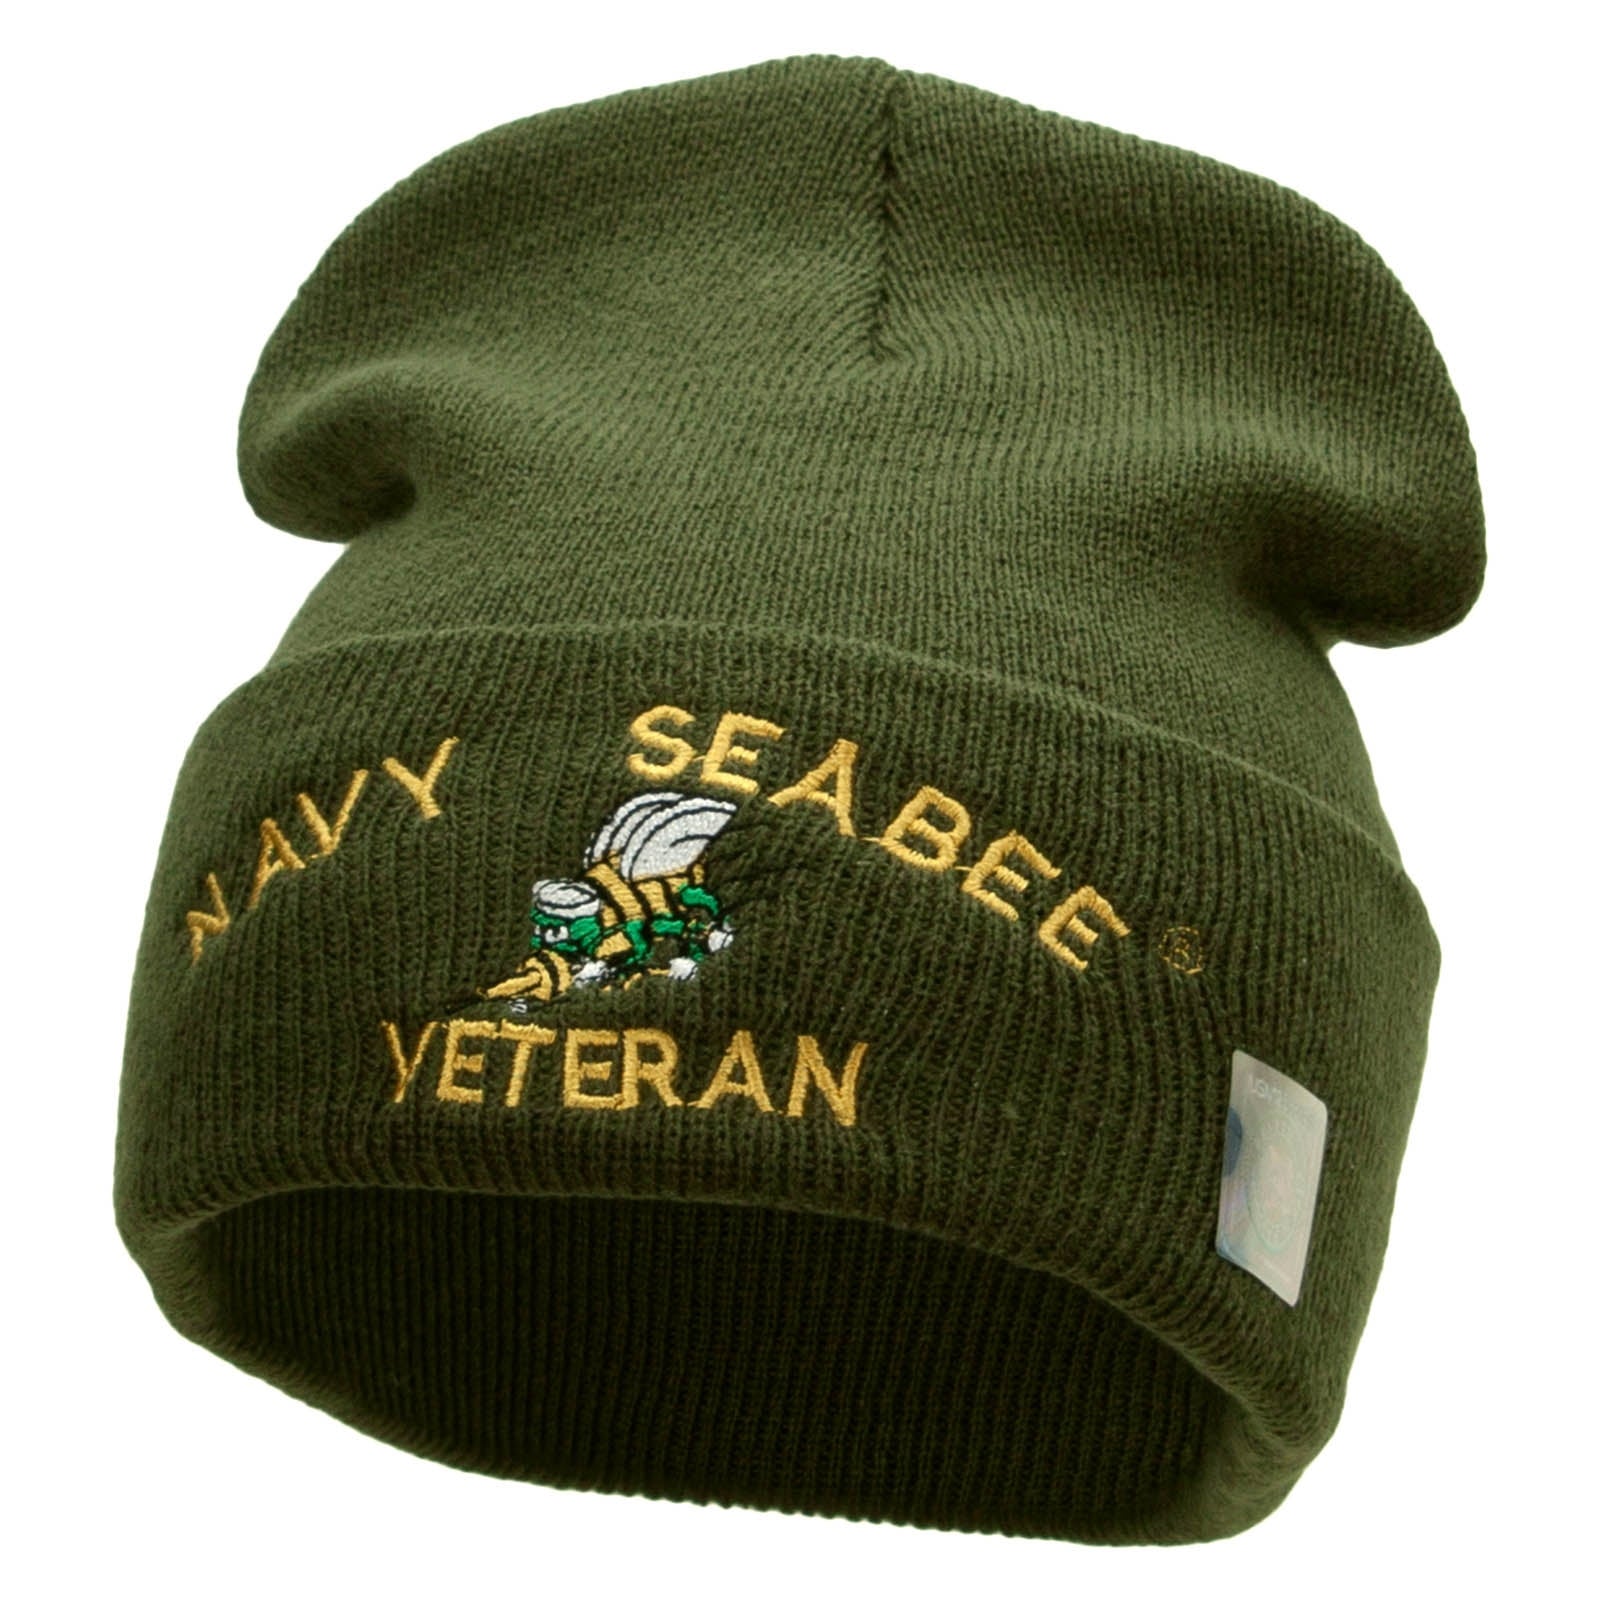 Licensed US Navy Seabee Veteran Military Embroidered Long Beanie Made in USA - Olive OSFM